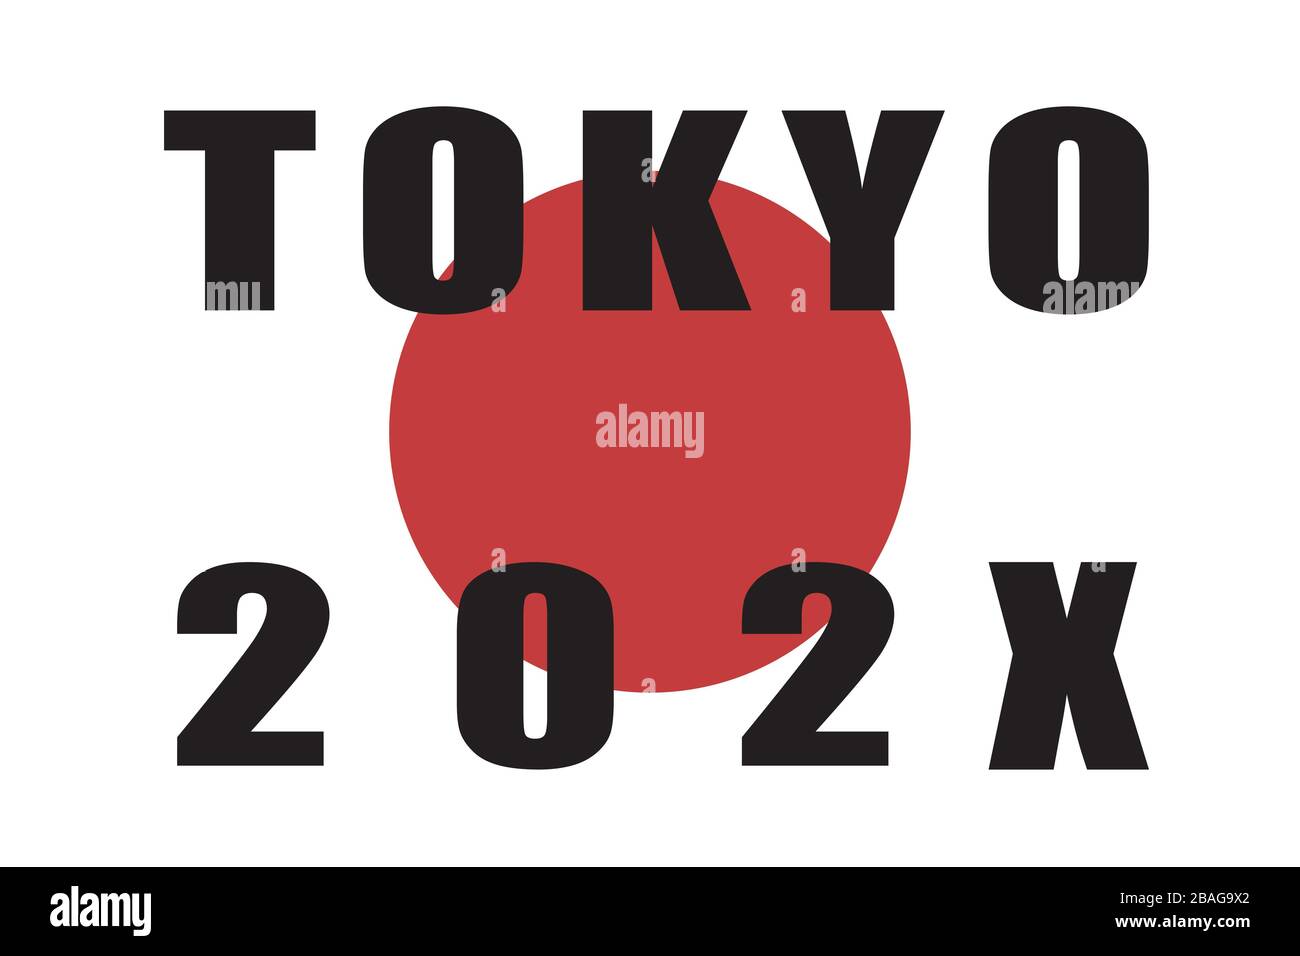 Text of Tokyo and 202X with a red sun in background Stock Vector